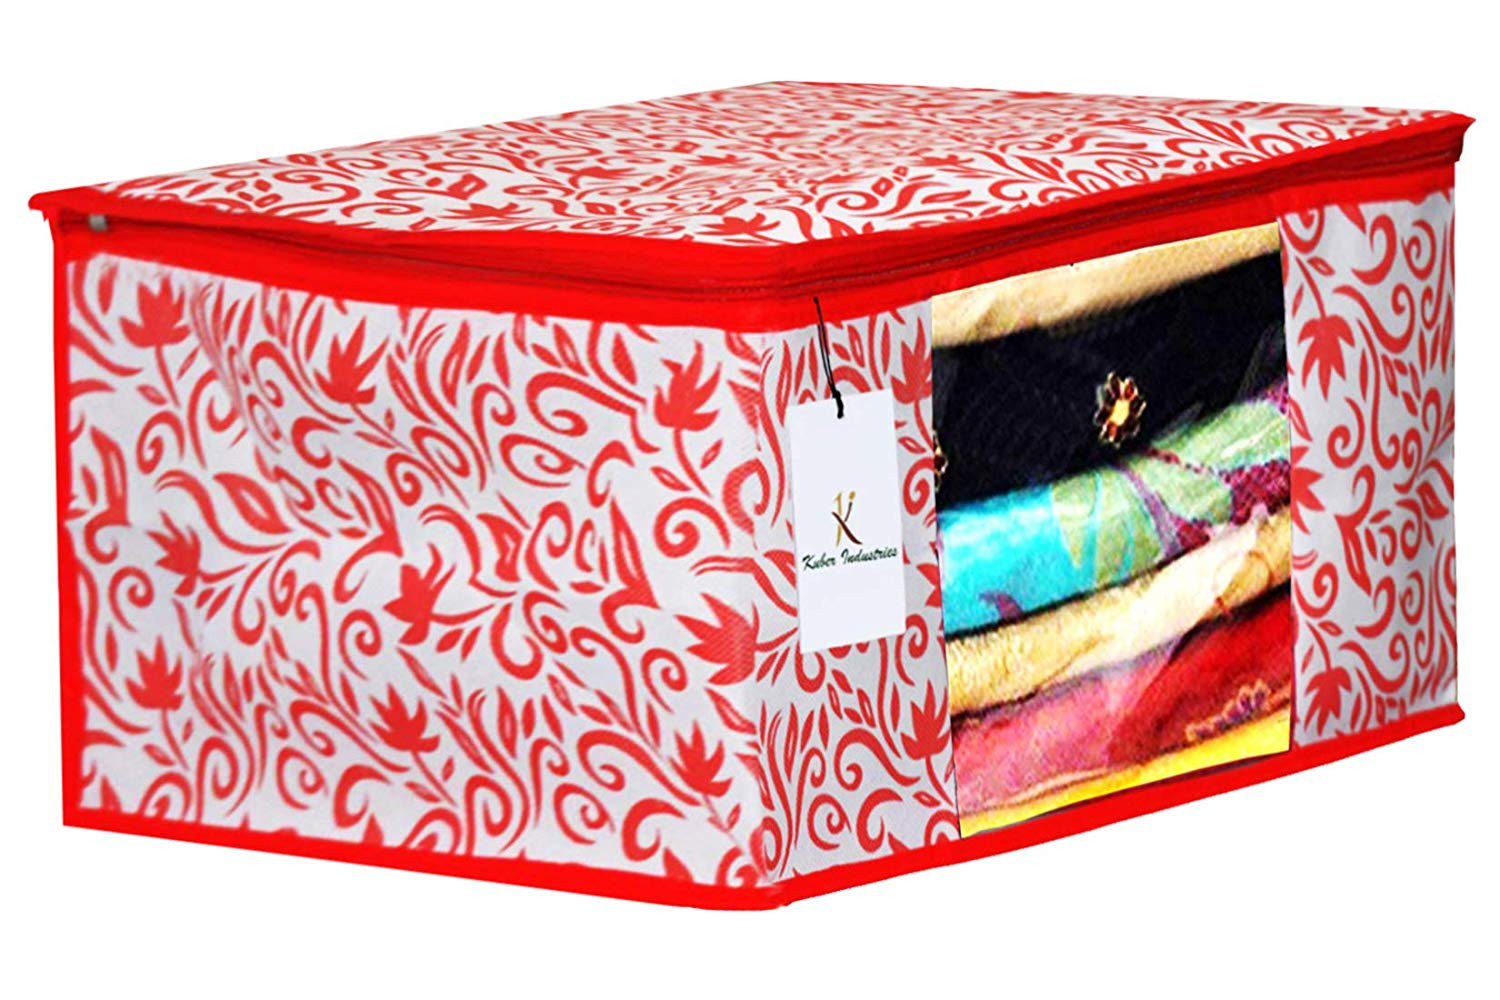 Kuber Industries Leaf Design Non Woven Saree Cover And Underbed Storage Bag, Cloth Organizer For Storage, Blanket Cover Combo Set (Red) -CTKTC38667